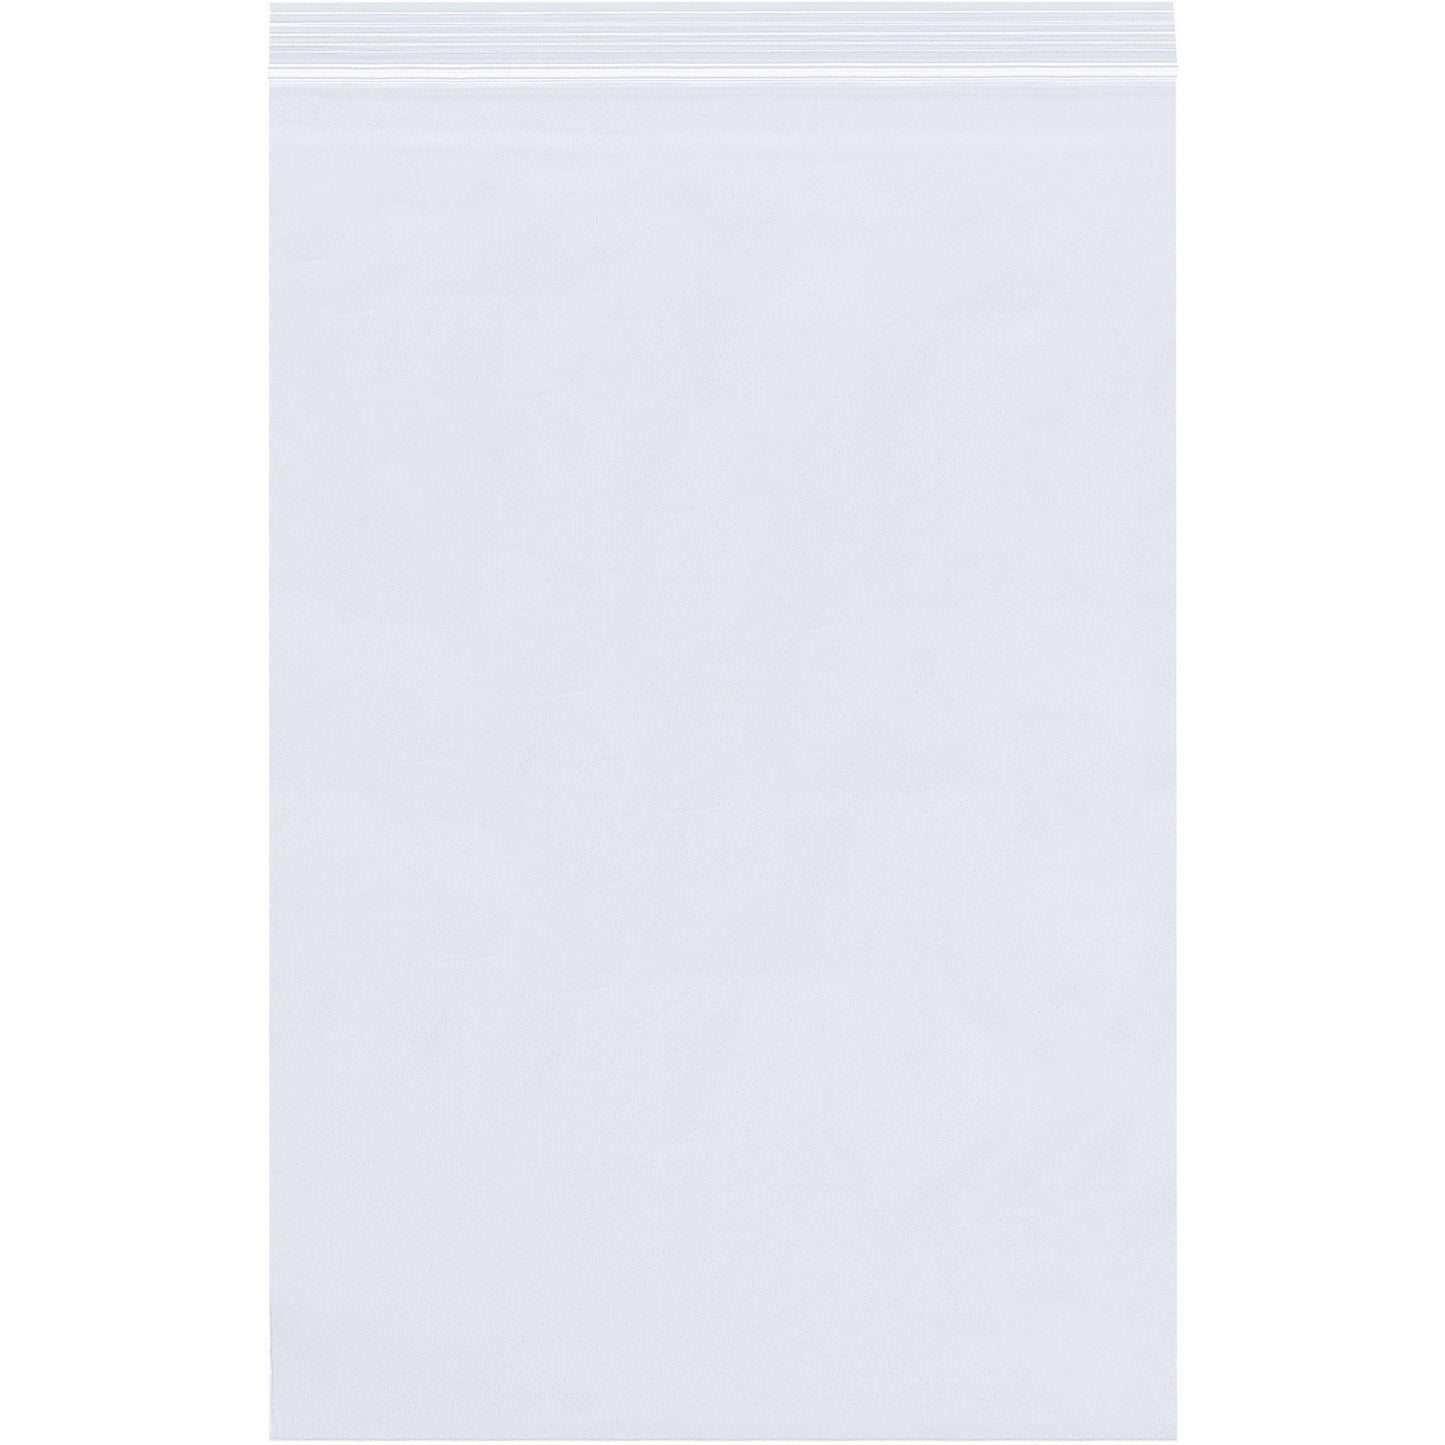 14 x 24" - 6 Mil Reclosable Poly Bags - PB3898